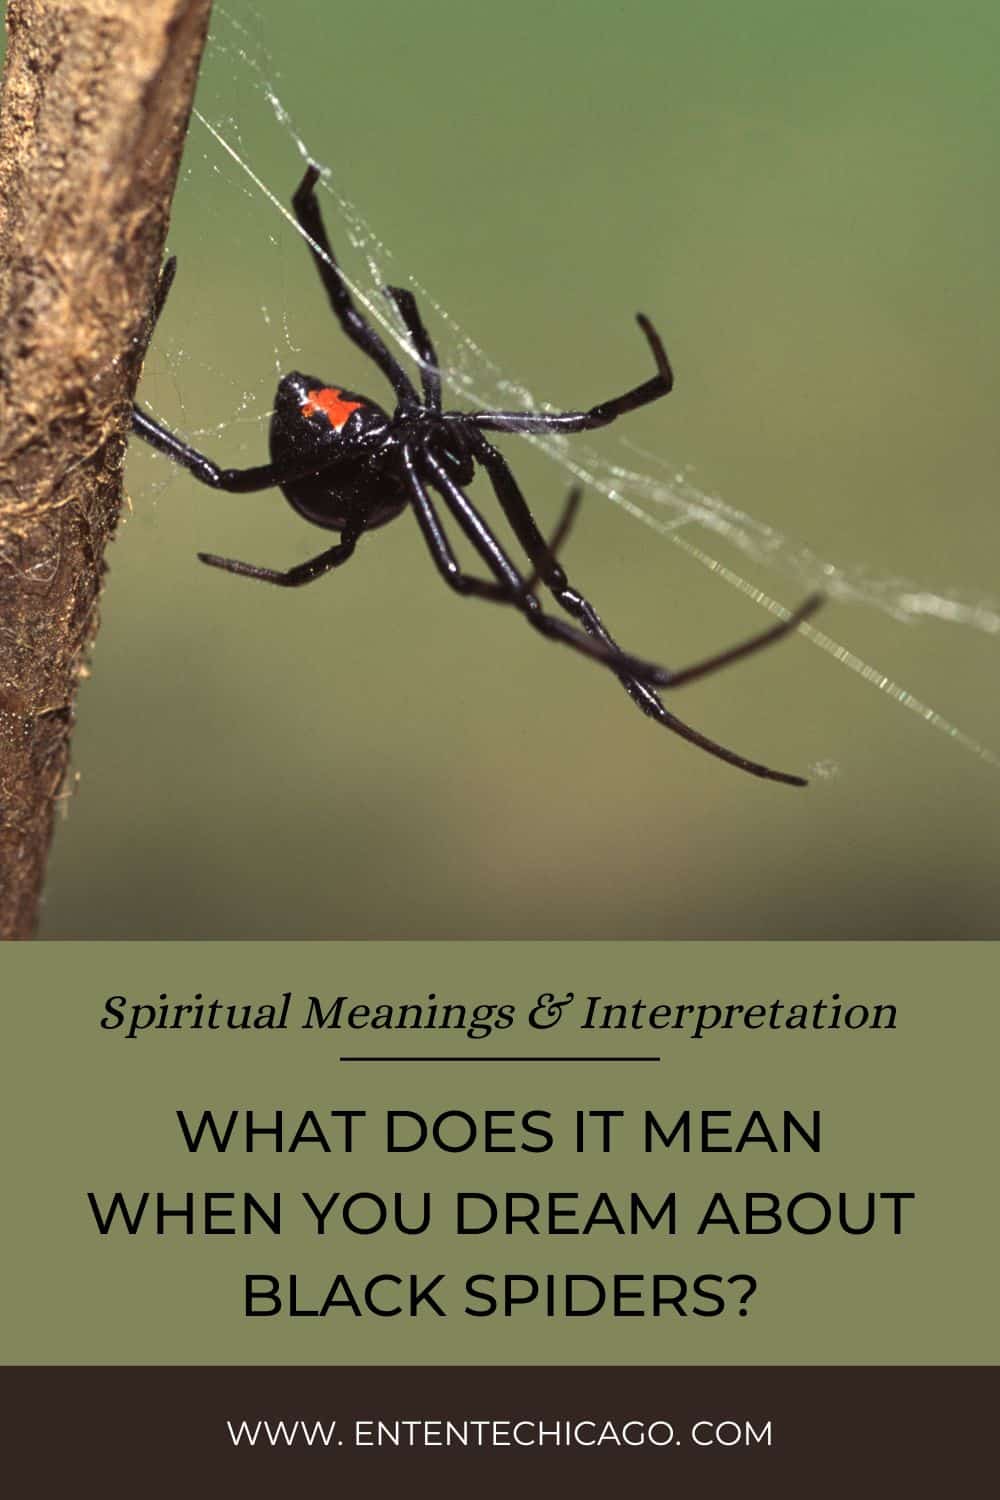 What Does It Mean When You Dream About Black Spiders (Spiritual Meanings & Interpretation)